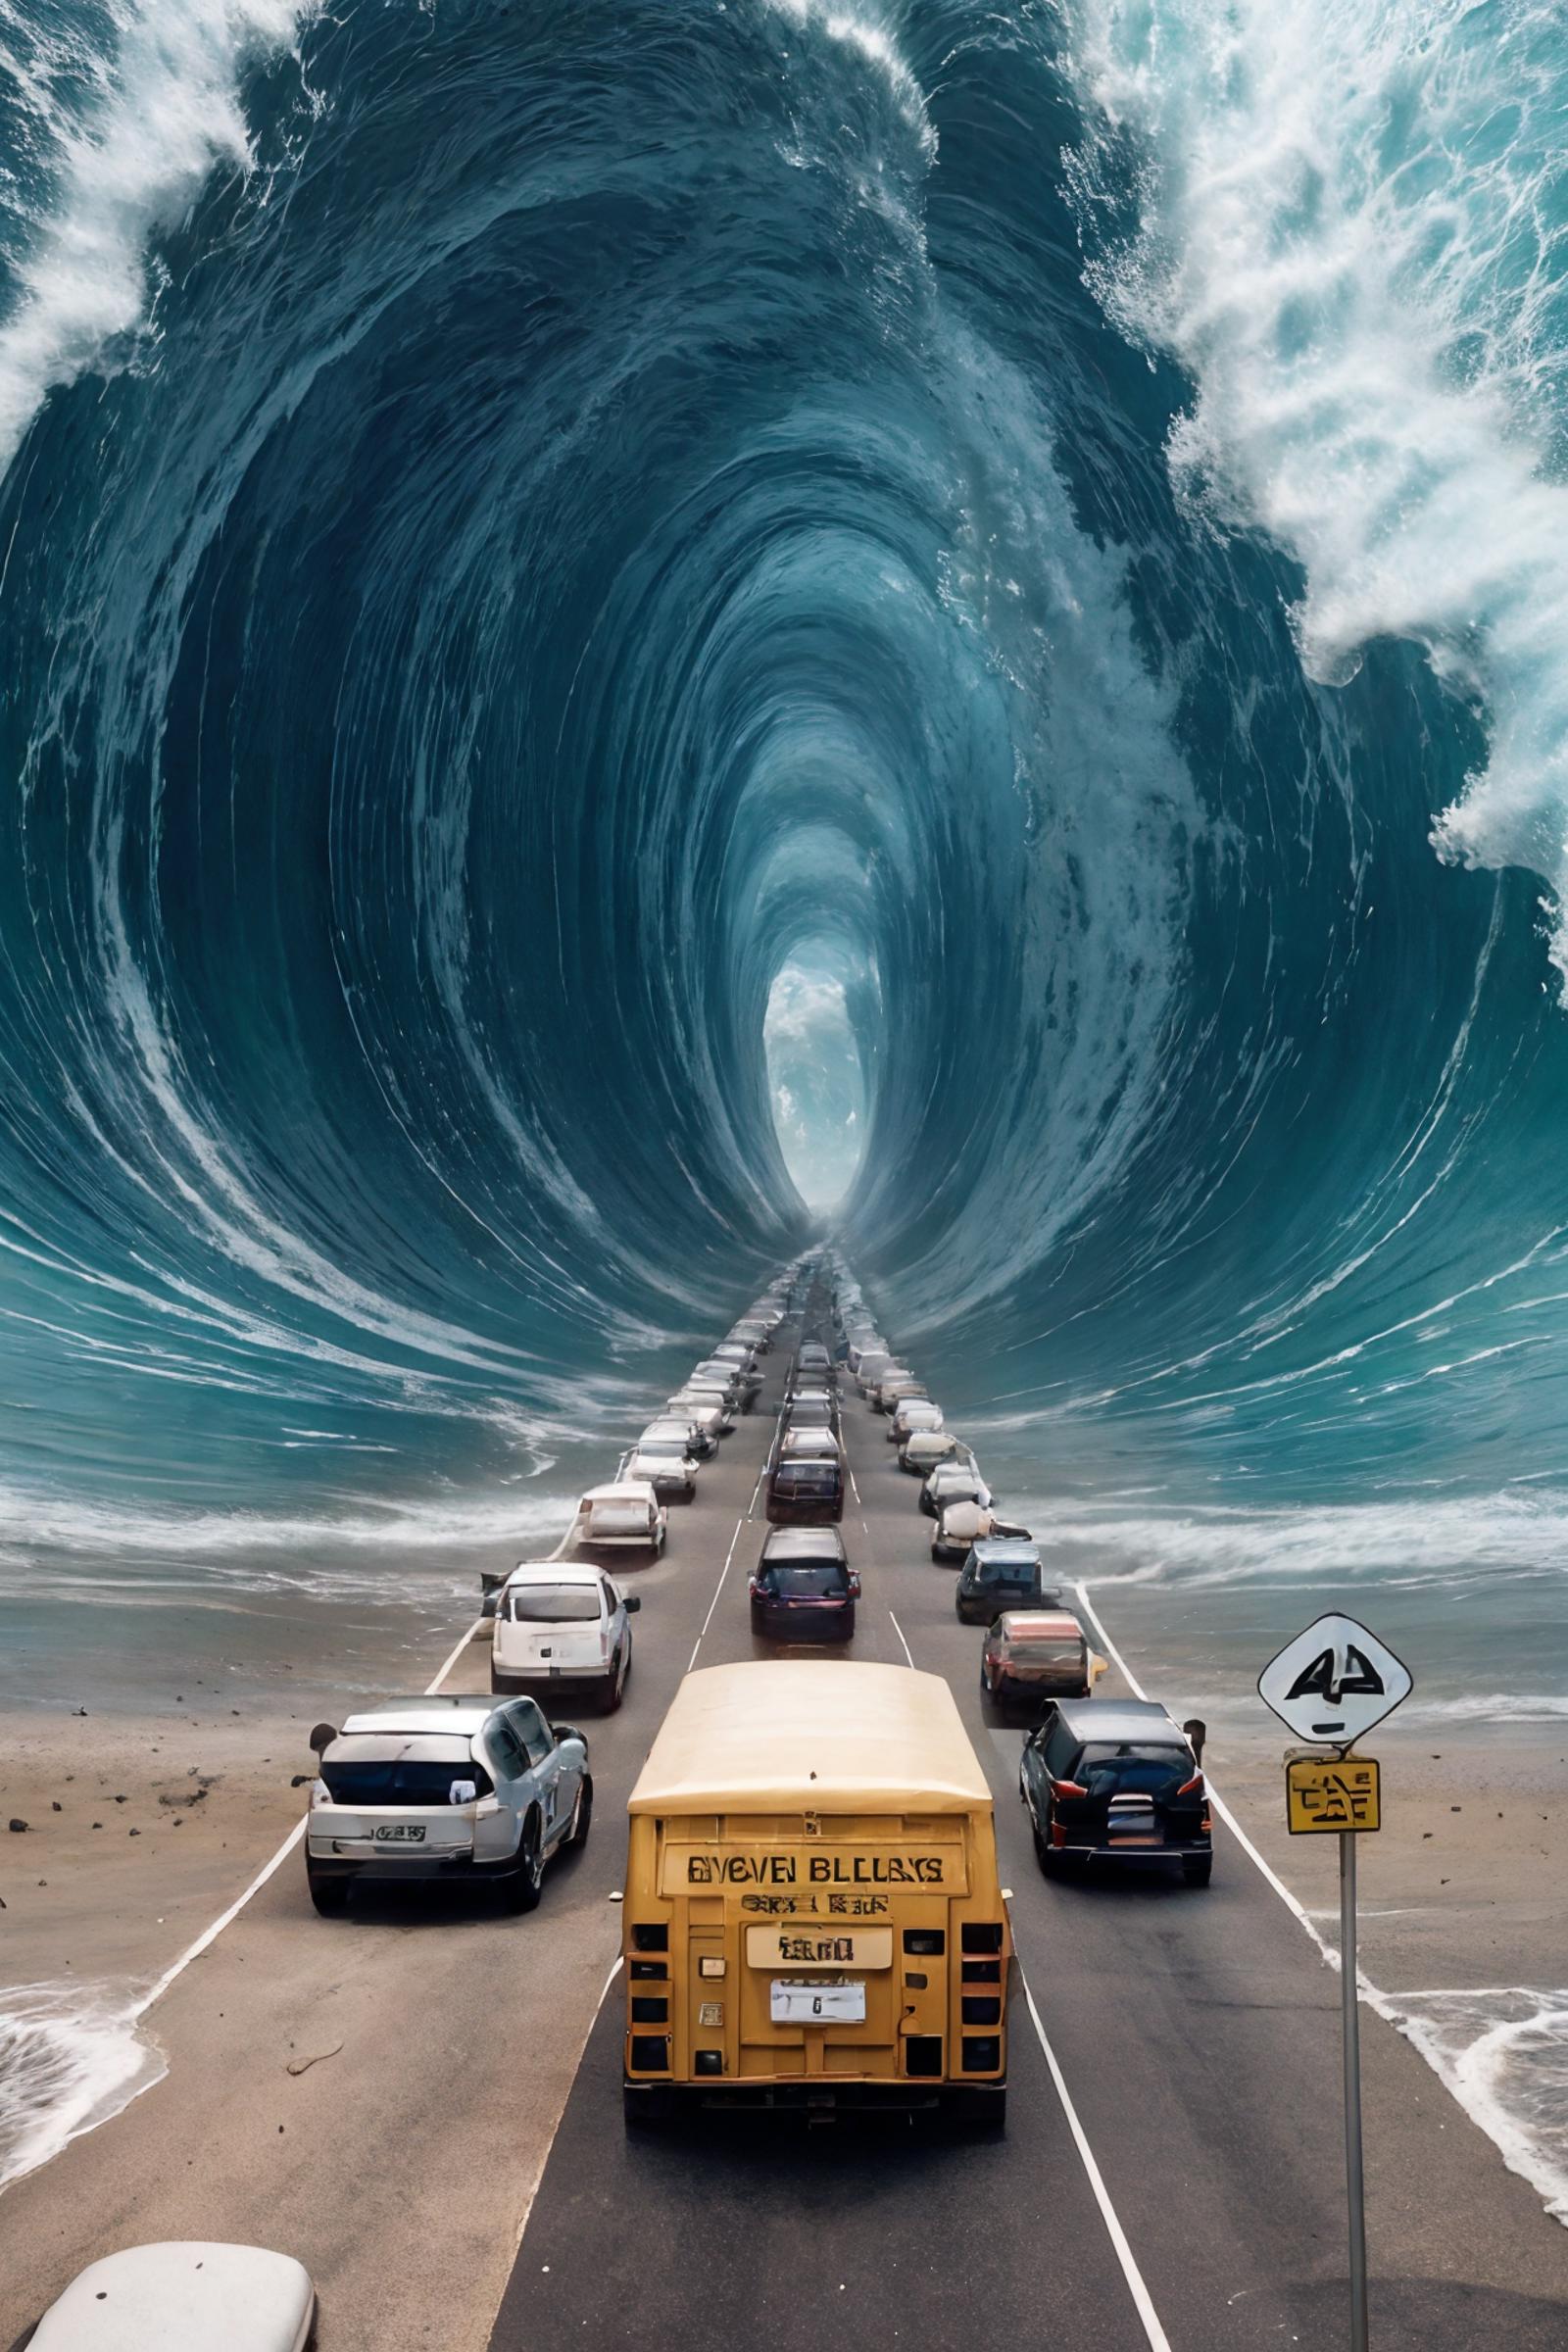 A highway going through a tunnel in a 3D animated image of a giant wave.